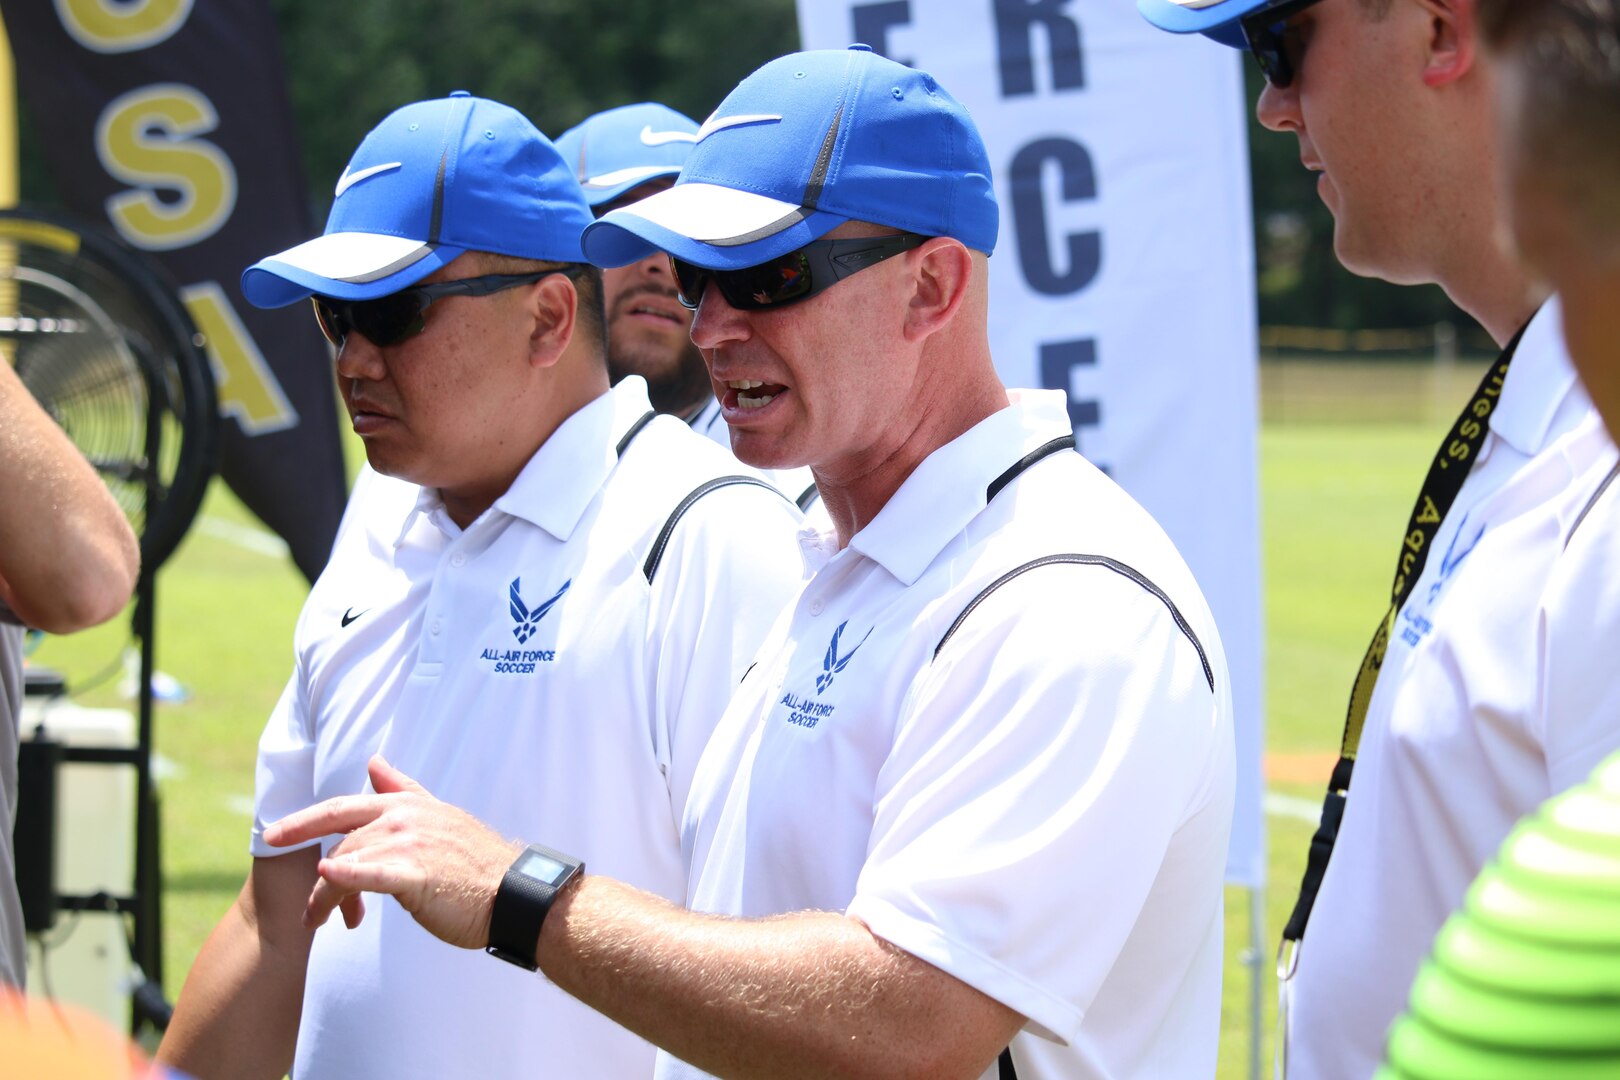 Air Force Head Coach Lt Col. Derrick Weyand (center) gives instructions during halftime as Air Force defeats Army 3-0 win in match six of the 2016 Armed Forces Men's Soccer Championship hosted at Fort Benning, Ga from 6-14 May 2016.  Air Force advances to the Championship Match versus Navy.